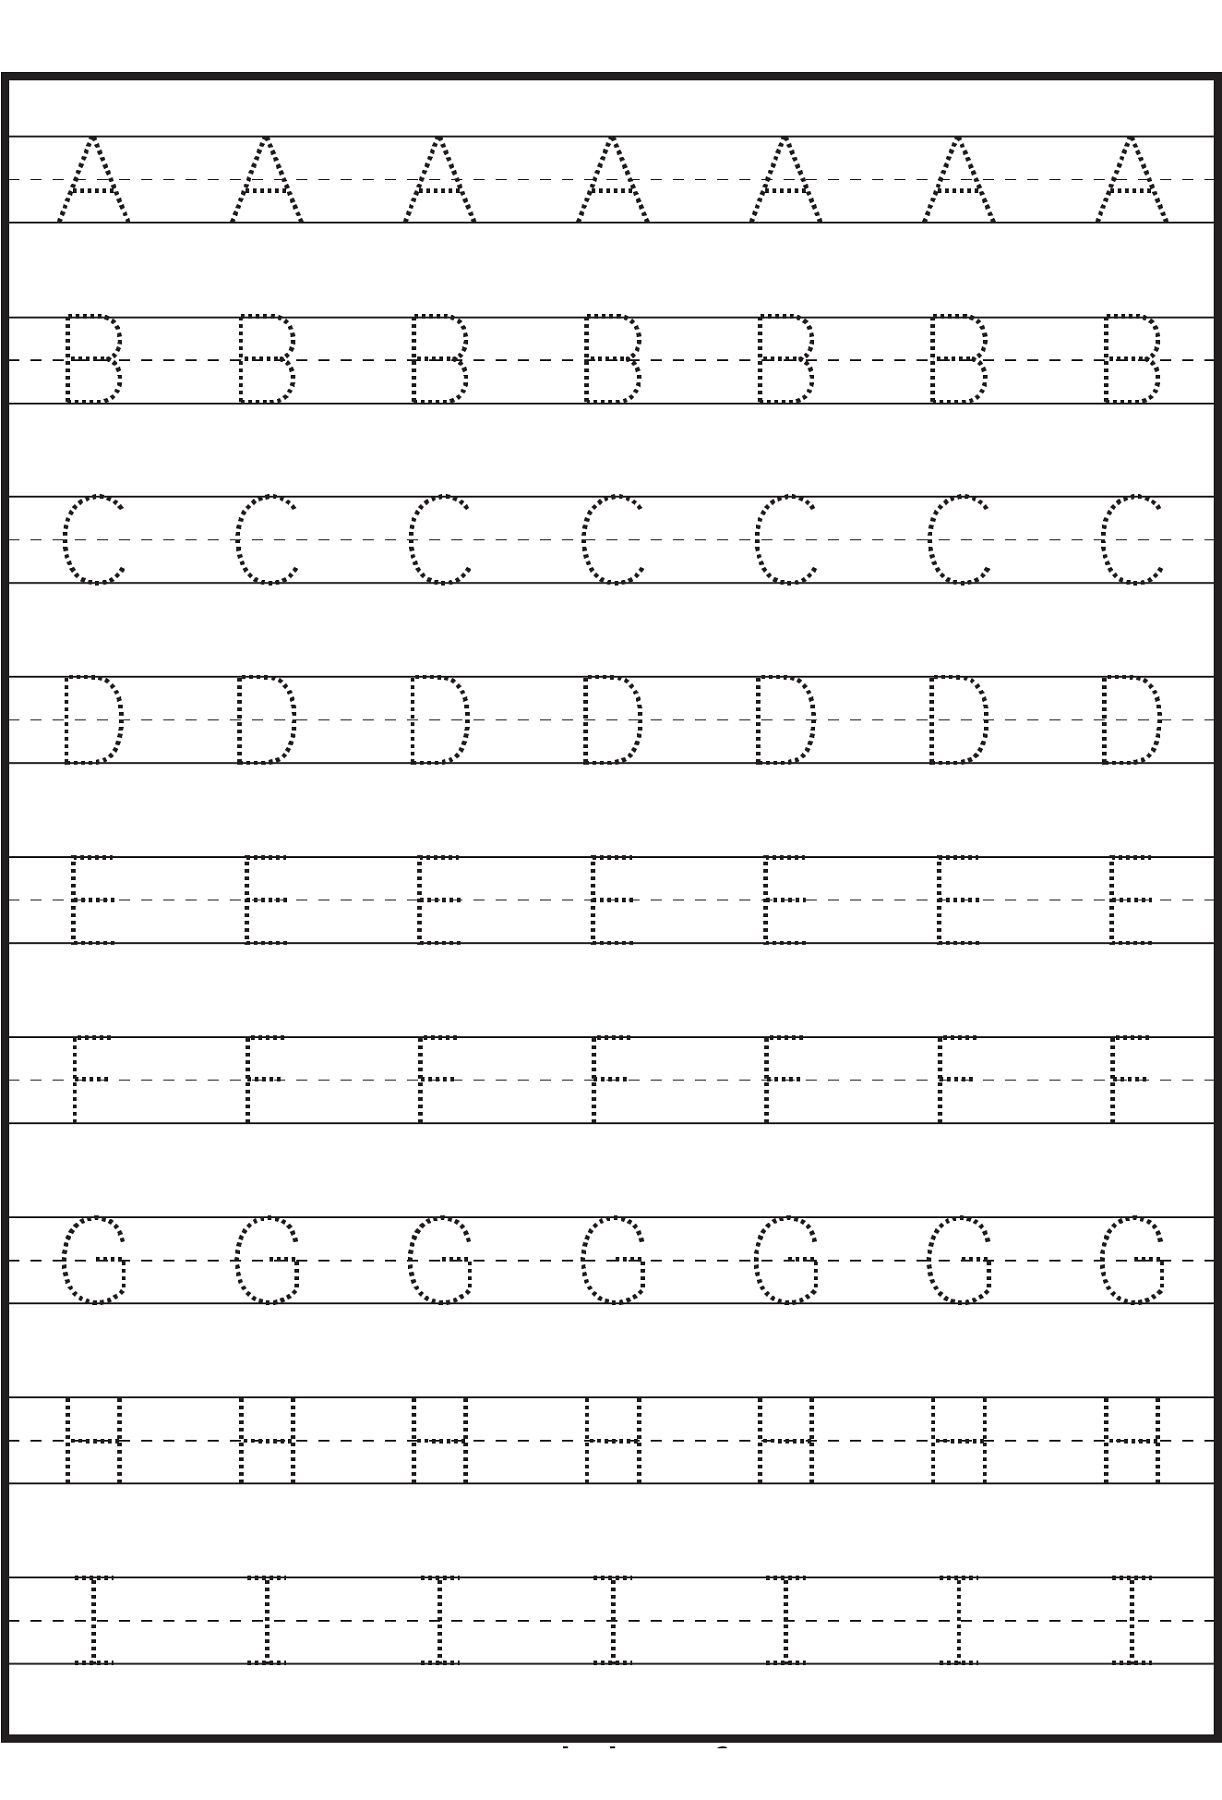 Coloring Book : Coloring Book Free Printable Alphabetg Pages within Alphabet Worksheets To Print